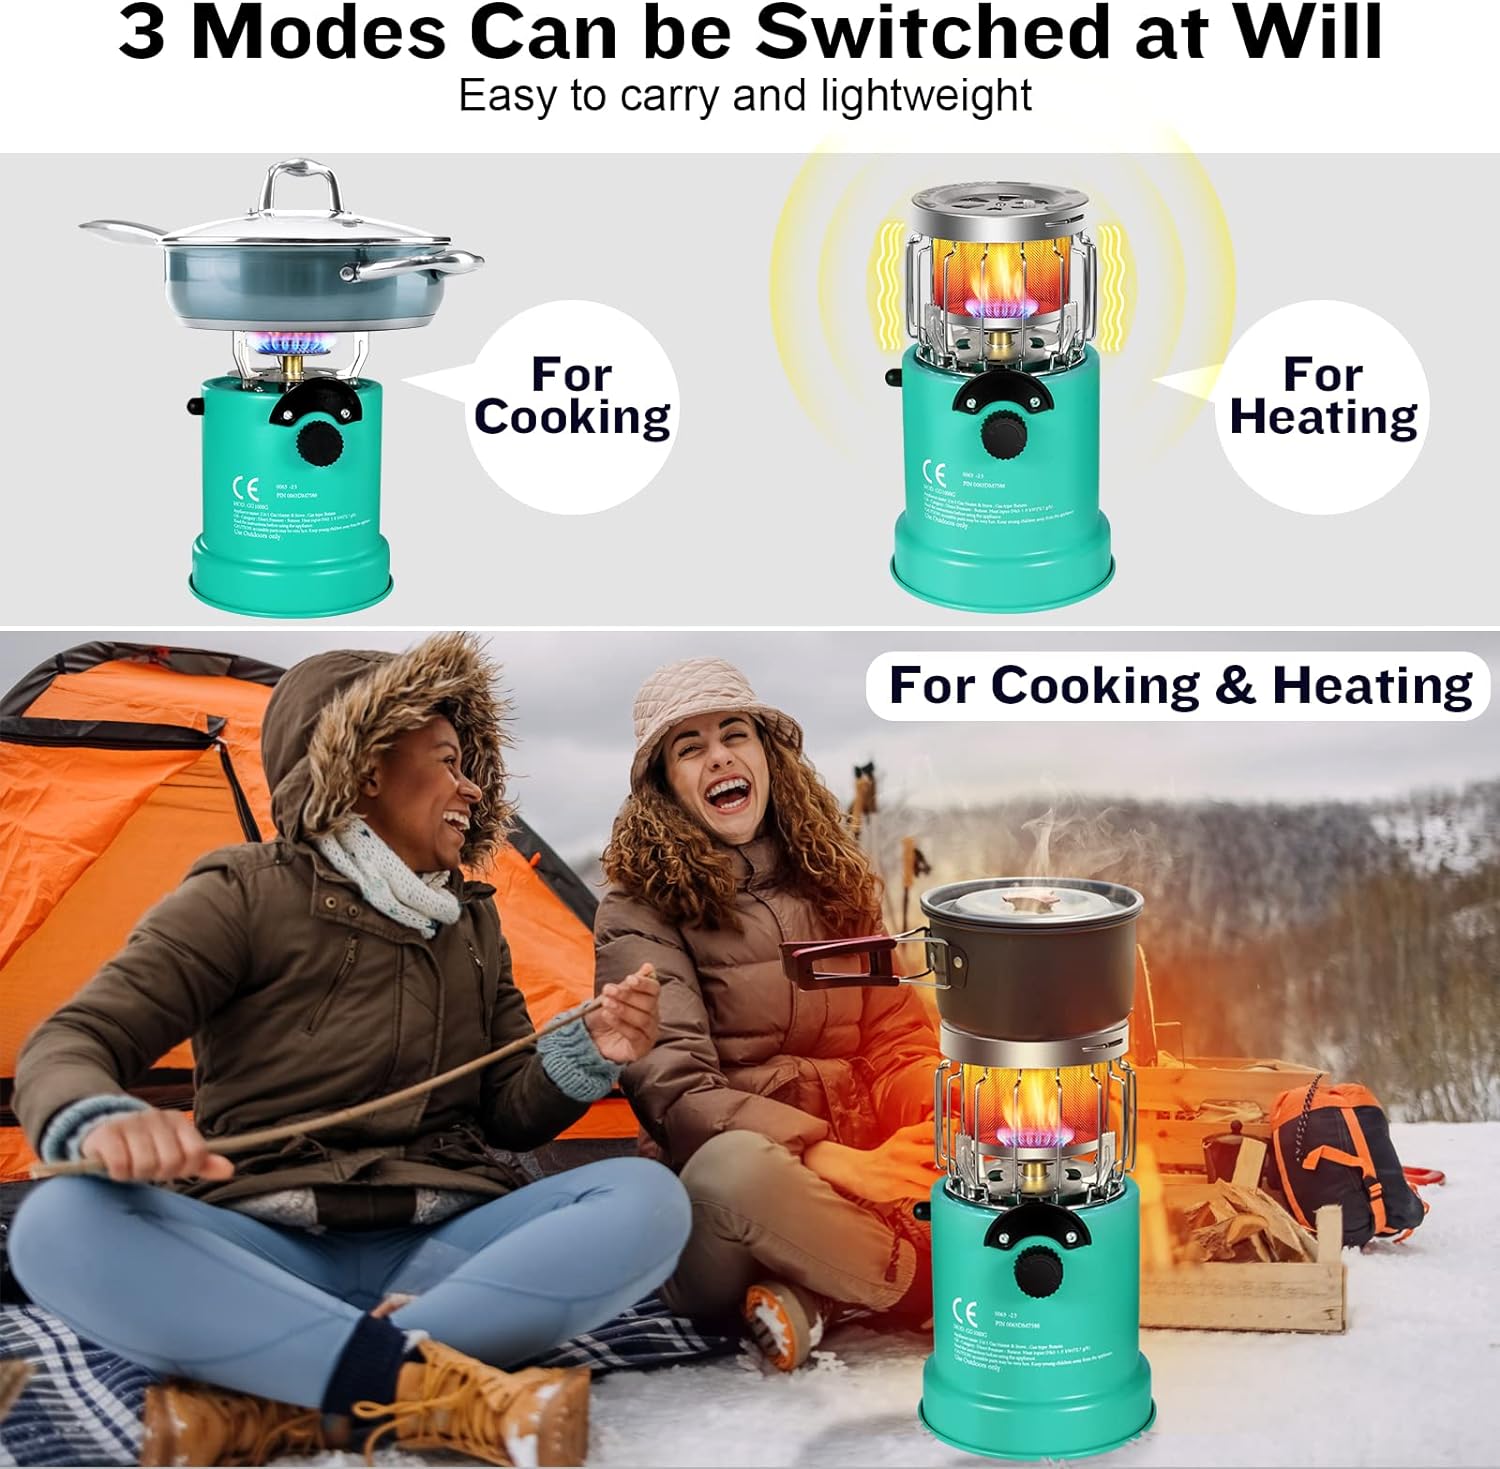 2 in 1 Portable Propane Heater  Stove,Outdoor stove with automatic igniter. for Camping Ice Fishing, Hunting Survival（Pot not included） - 2 In 1 Portable Propane Heater & Stove Review